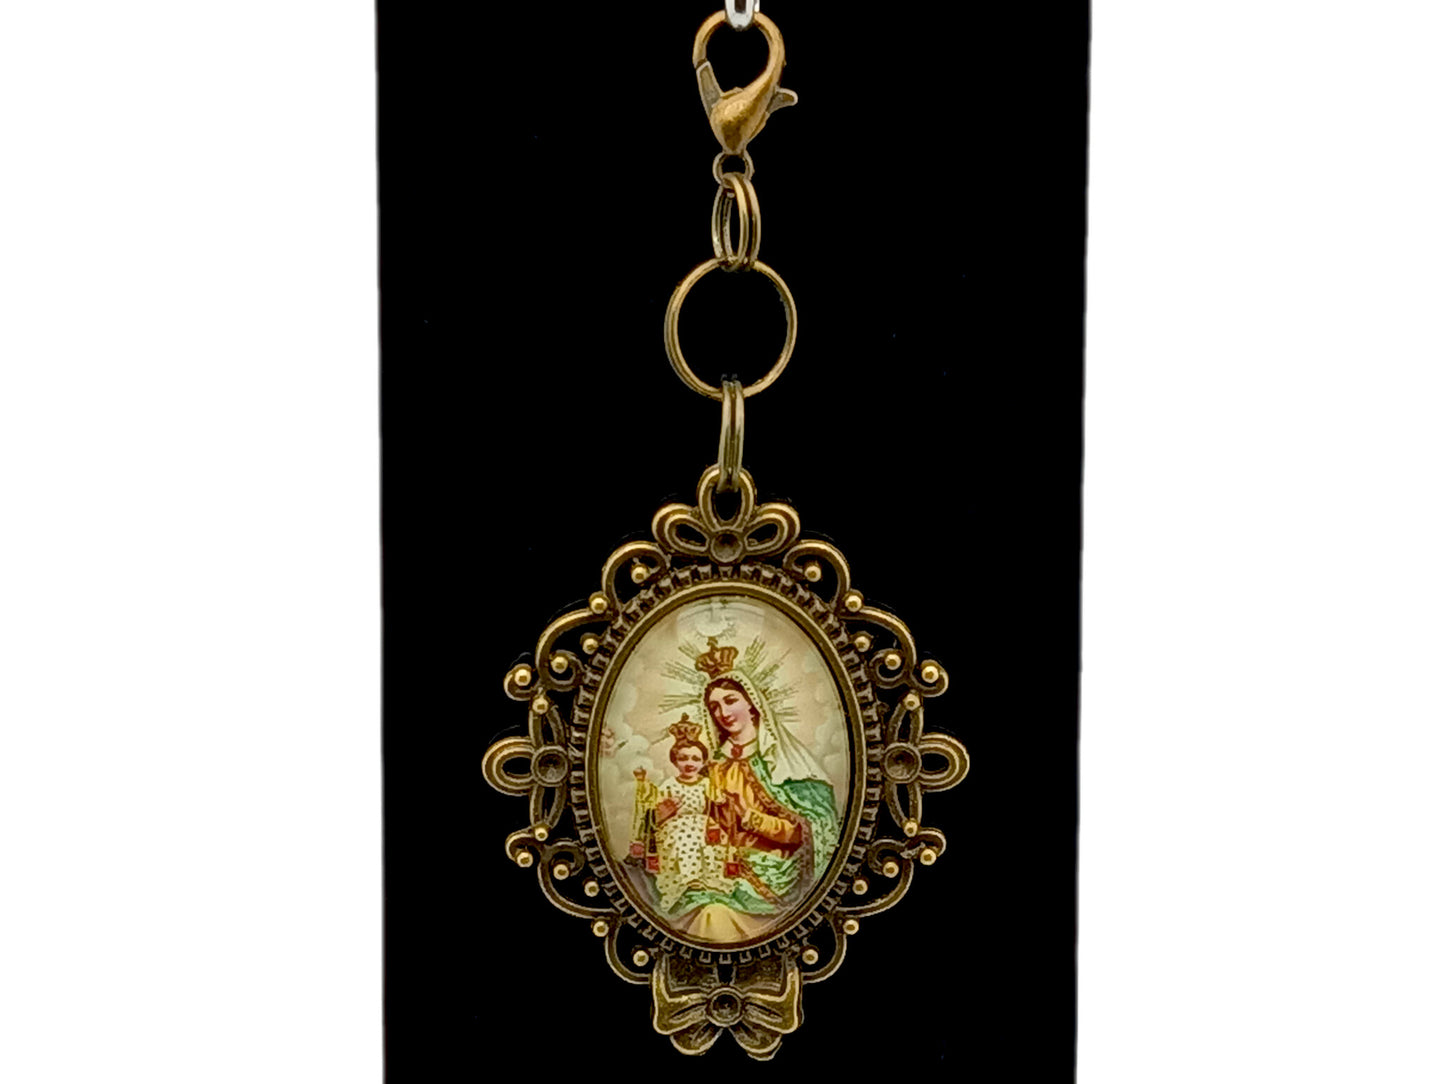 Our Lady of Mount Carmel unique rosary beads purse clip key chain with antique style domed picture medal.